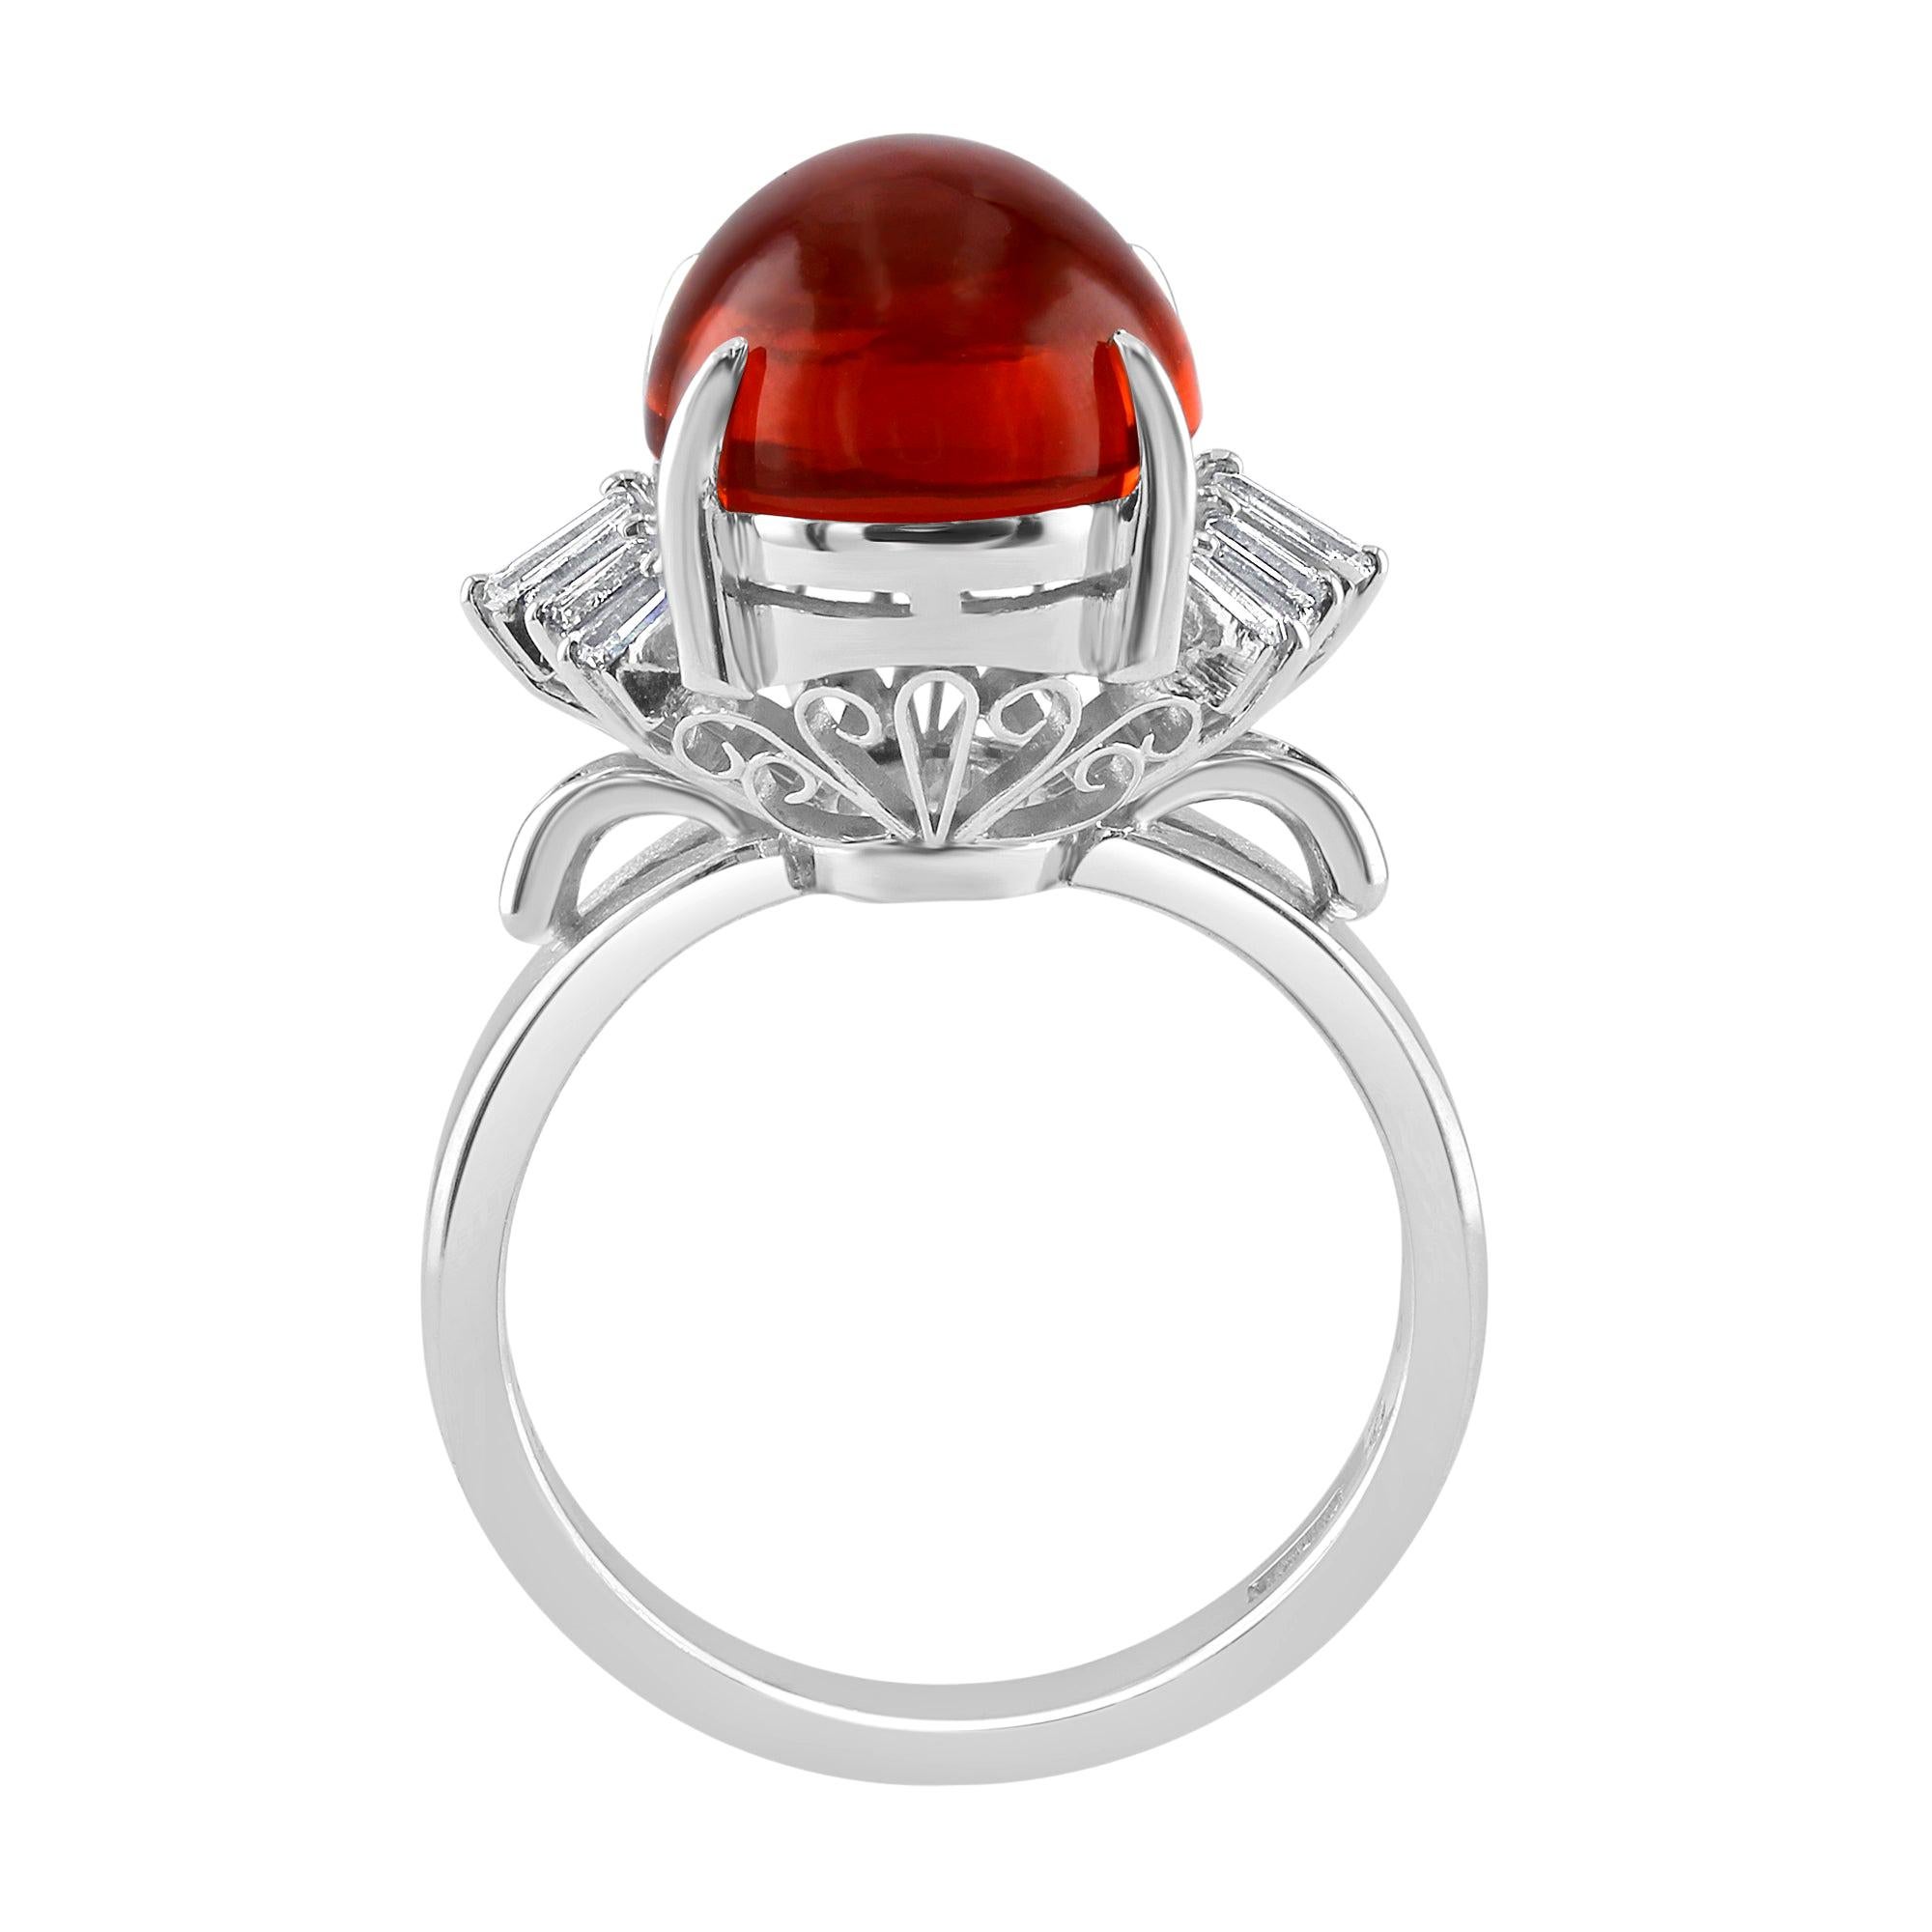 3.92 Carat Mexican Fire Opal Cabochon Ring Set in Platinum For Sale